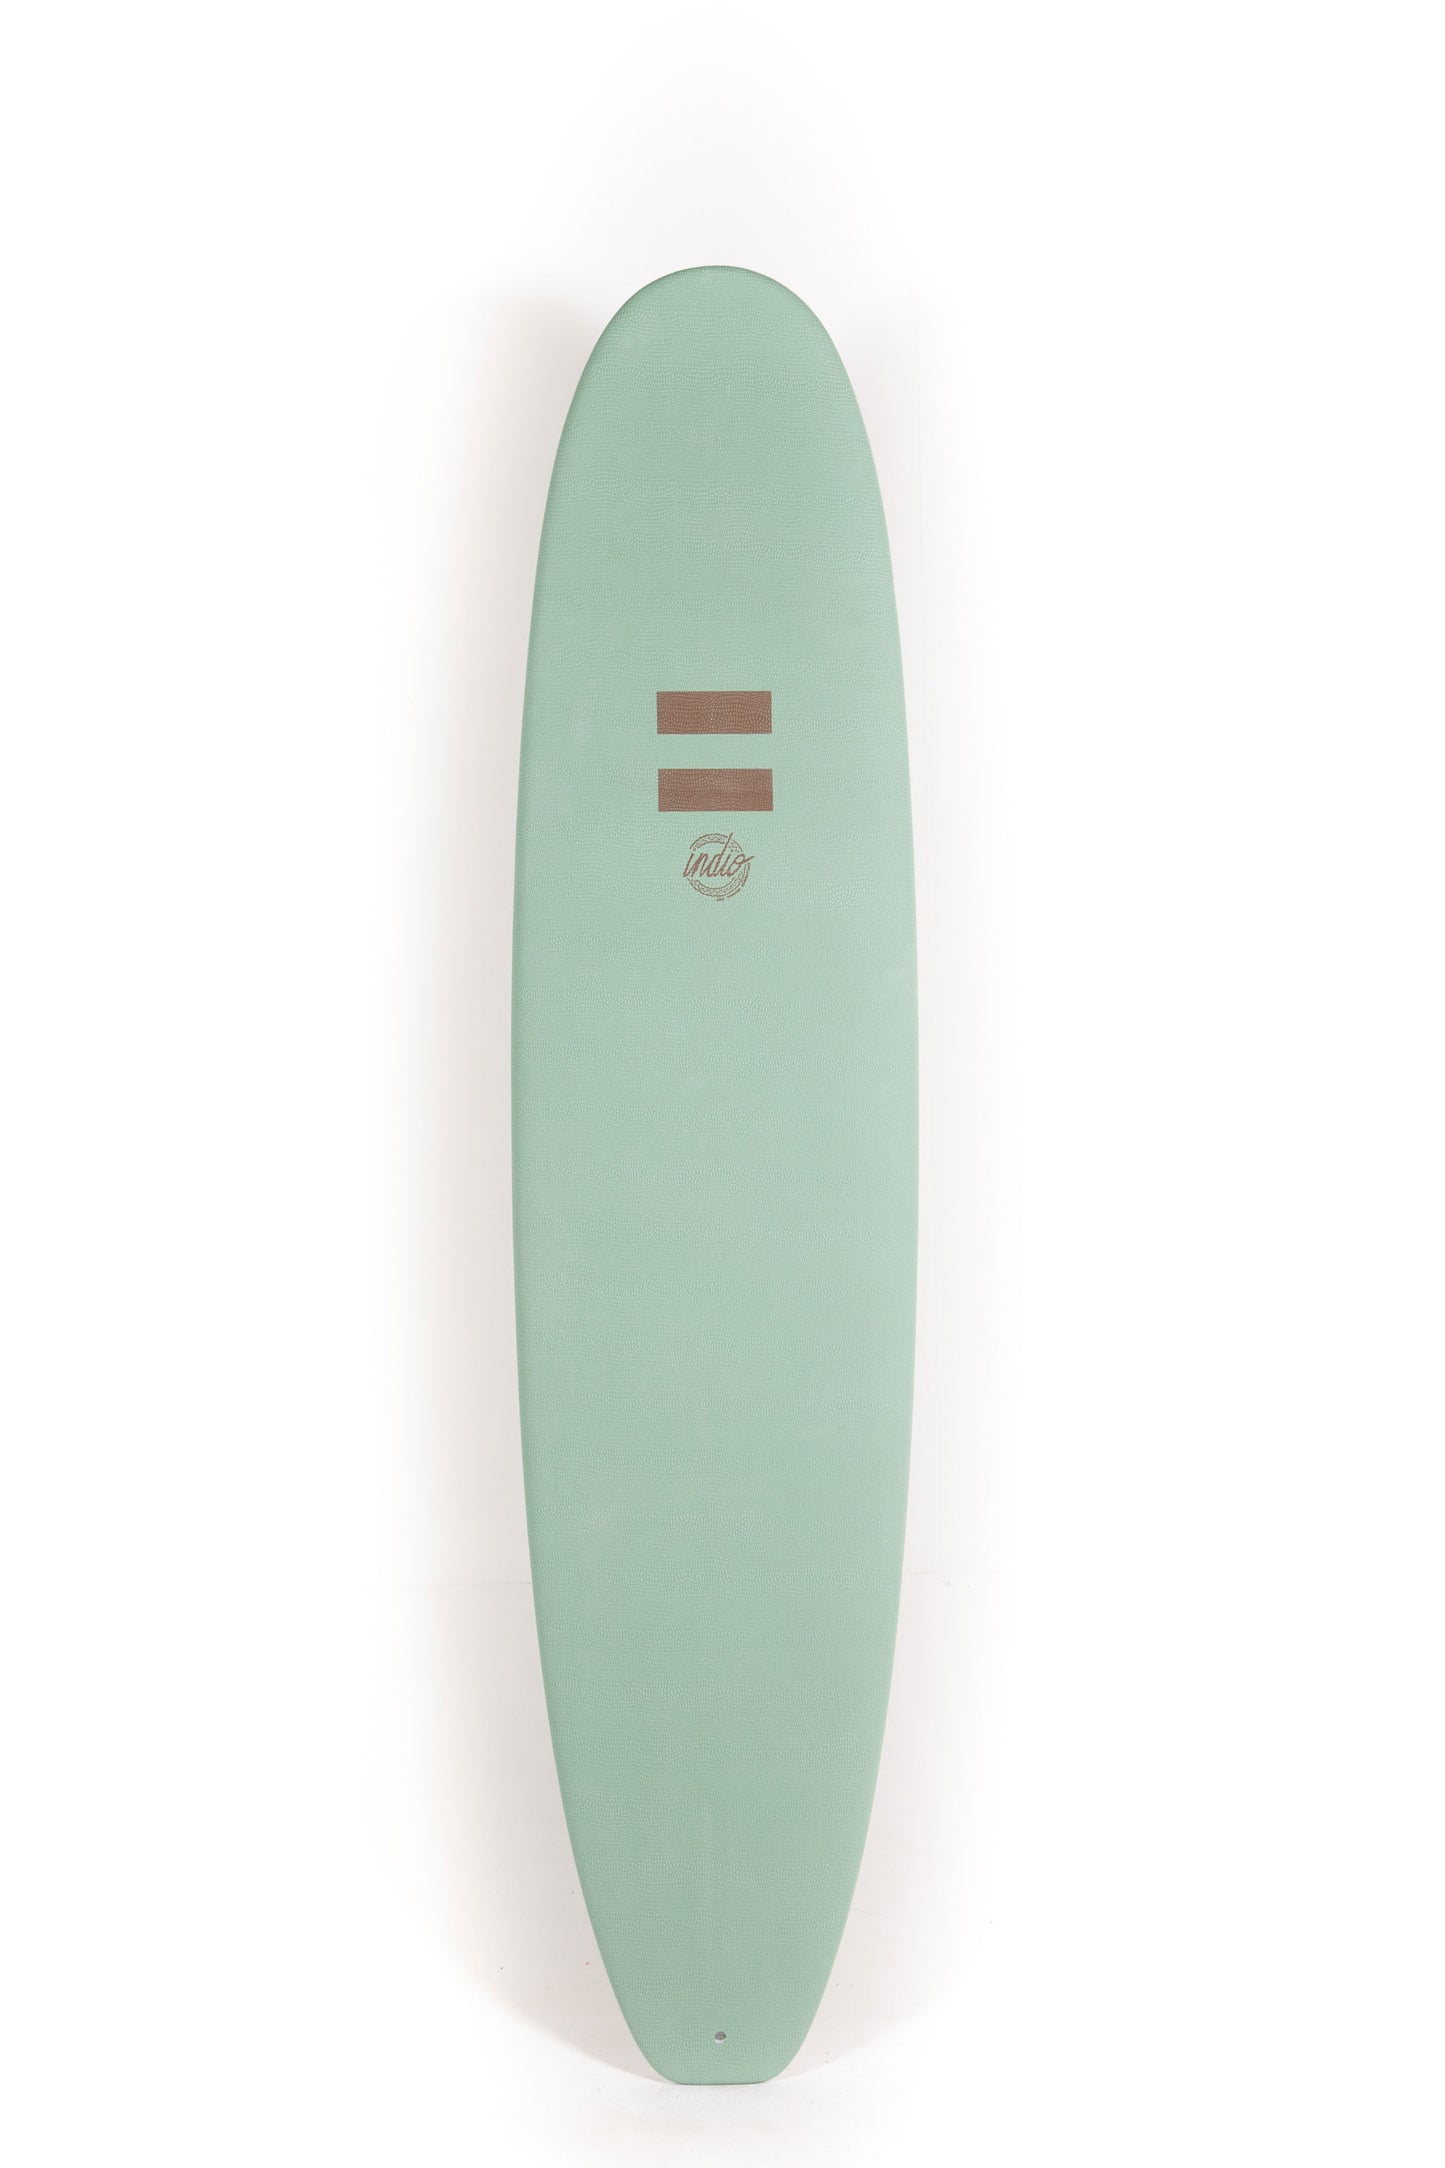 Pukas Surf Shop Indio Surfboards Mid Length Ultra Mint 8'0"